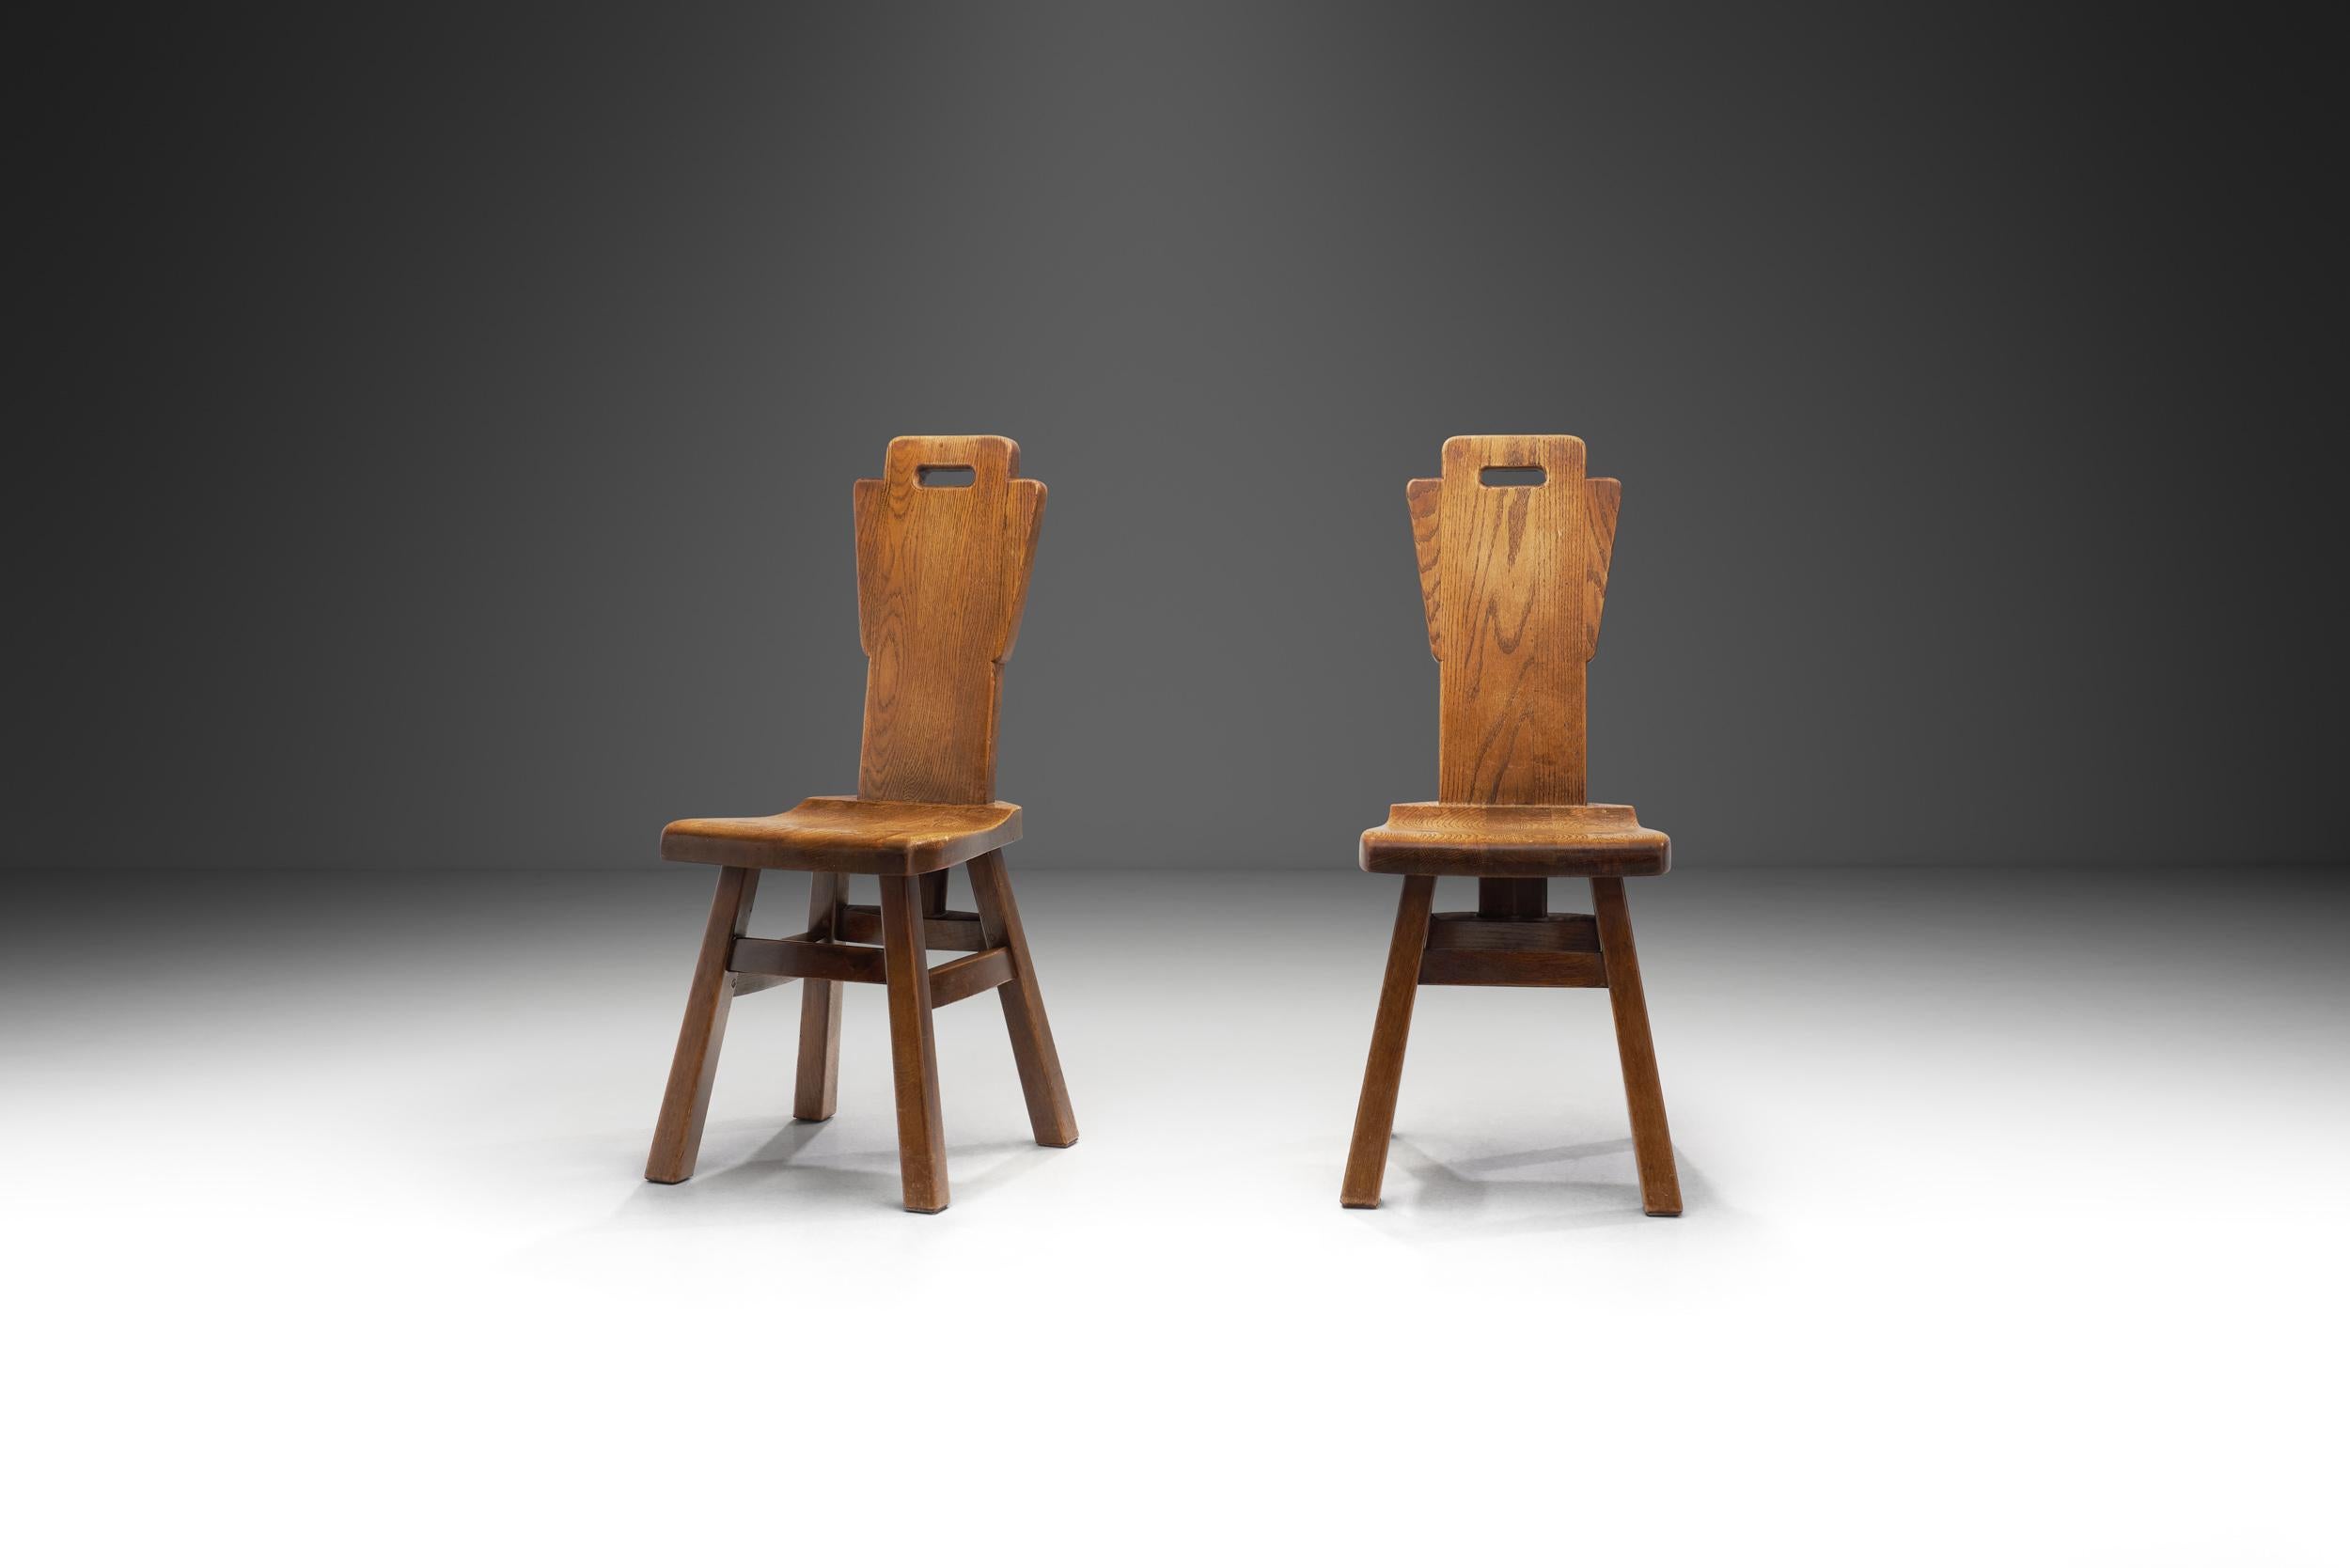 In the tumultuous design landscape of mid-20th century Belgium, this pair of chairs emerged from the hands of skilled craftsmen during the 1970s. Crafted from the dense and unyielding embrace of heavy oak, these brutalist pieces stand as Stoic